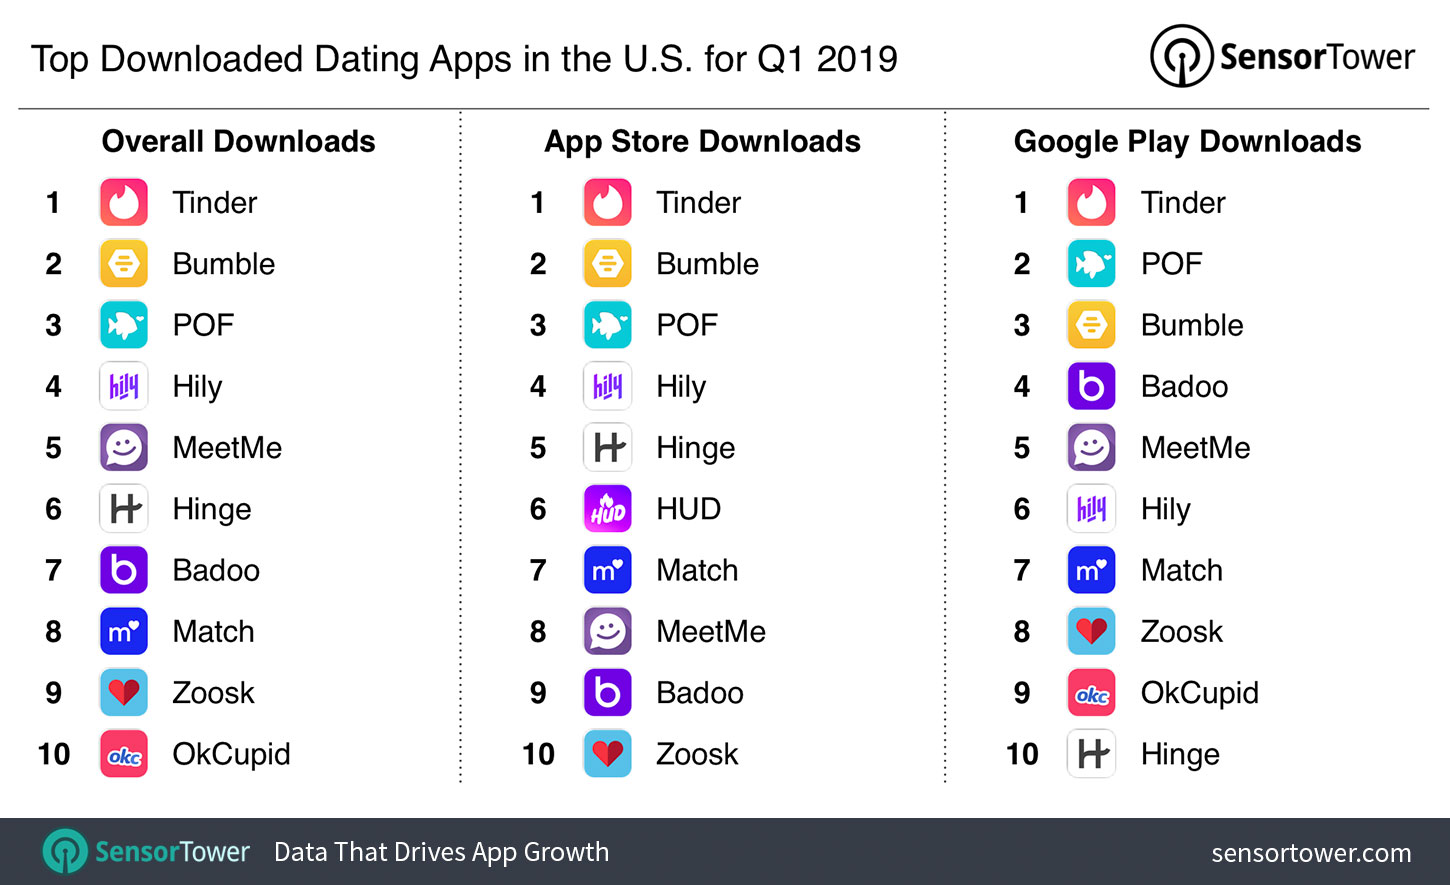 Top Dating Apps in the U.S. for Q1 2019 by Downloads